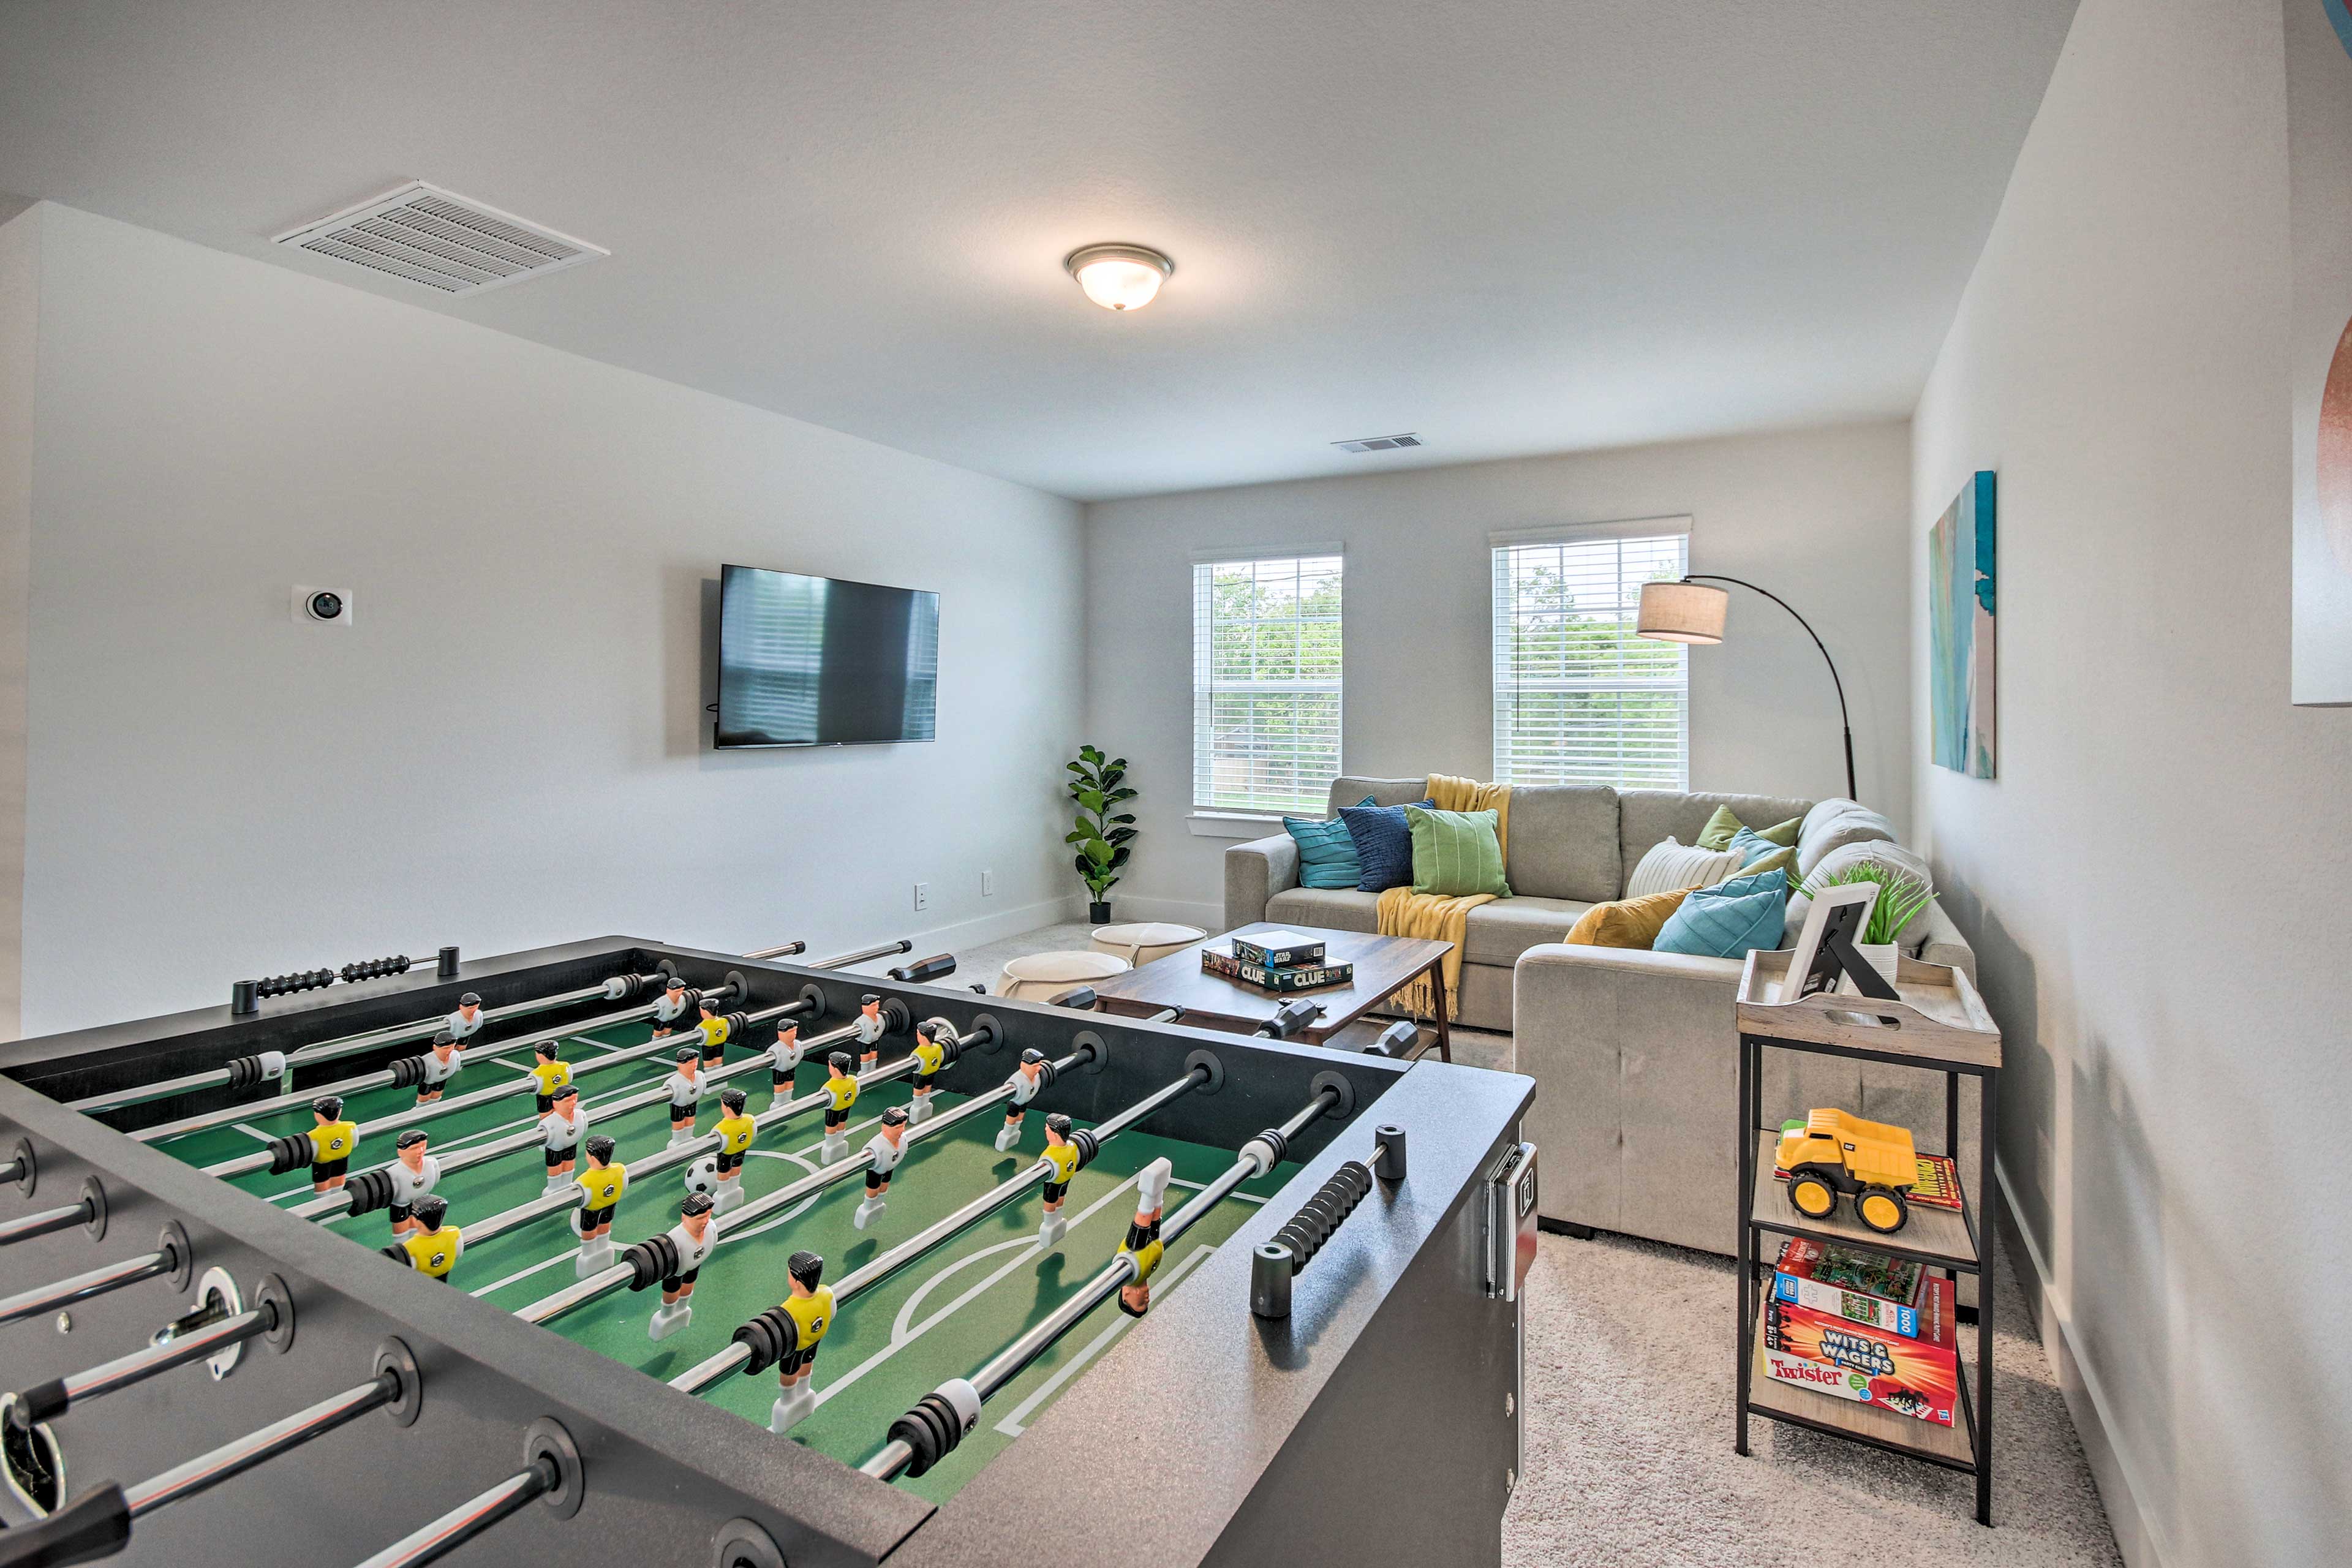 Game Room | Free WiFi | Smart TVs | Central A/C